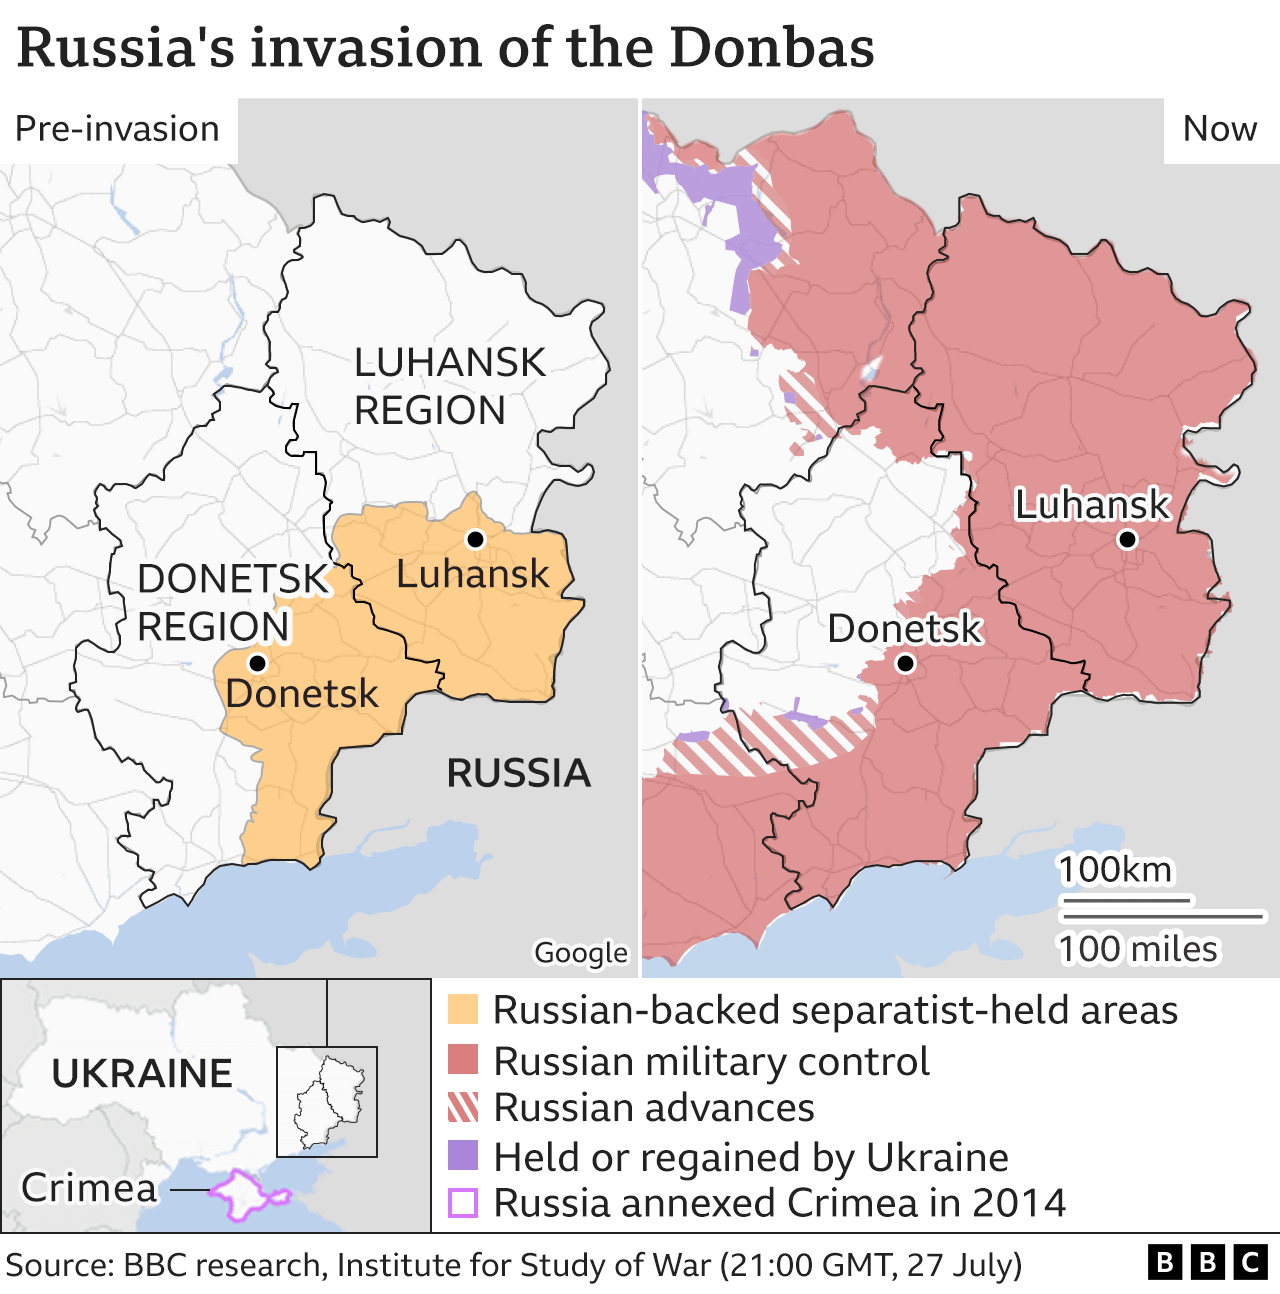 Map showing control of the Donbas region before and after the invasion